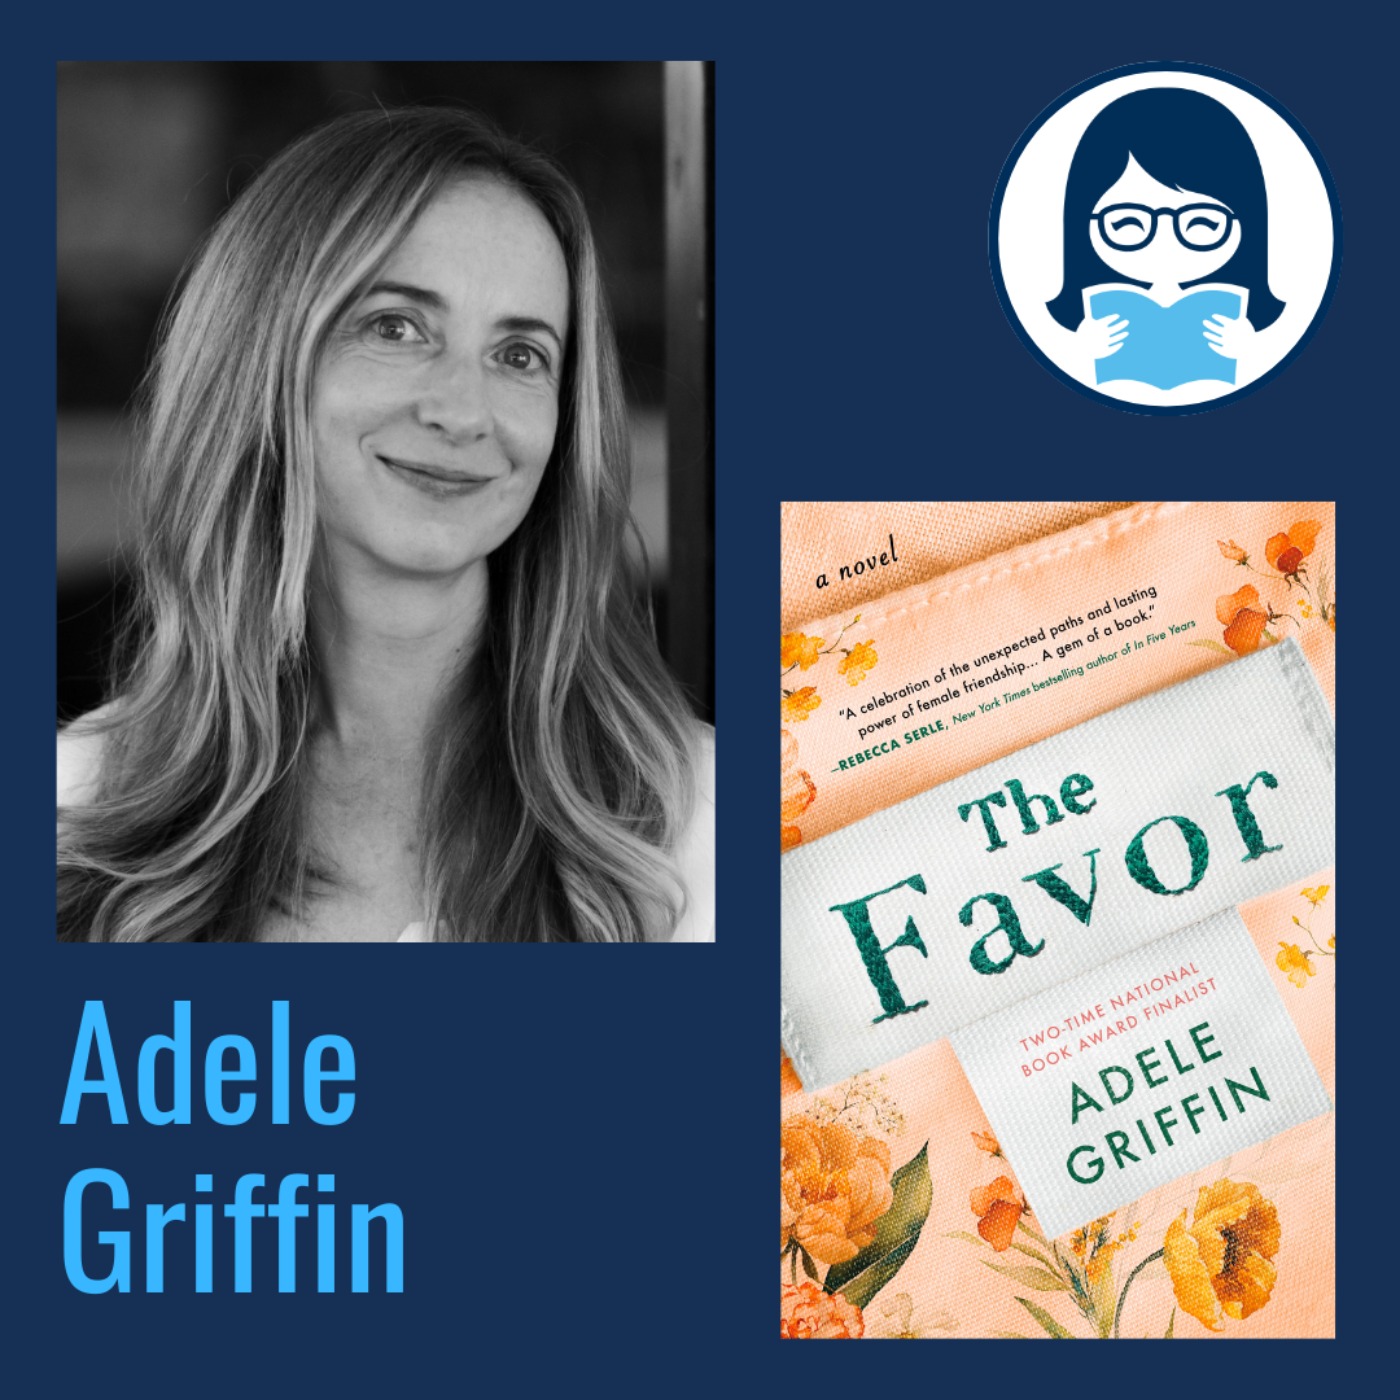 Adele Griffin, THE FAVOR